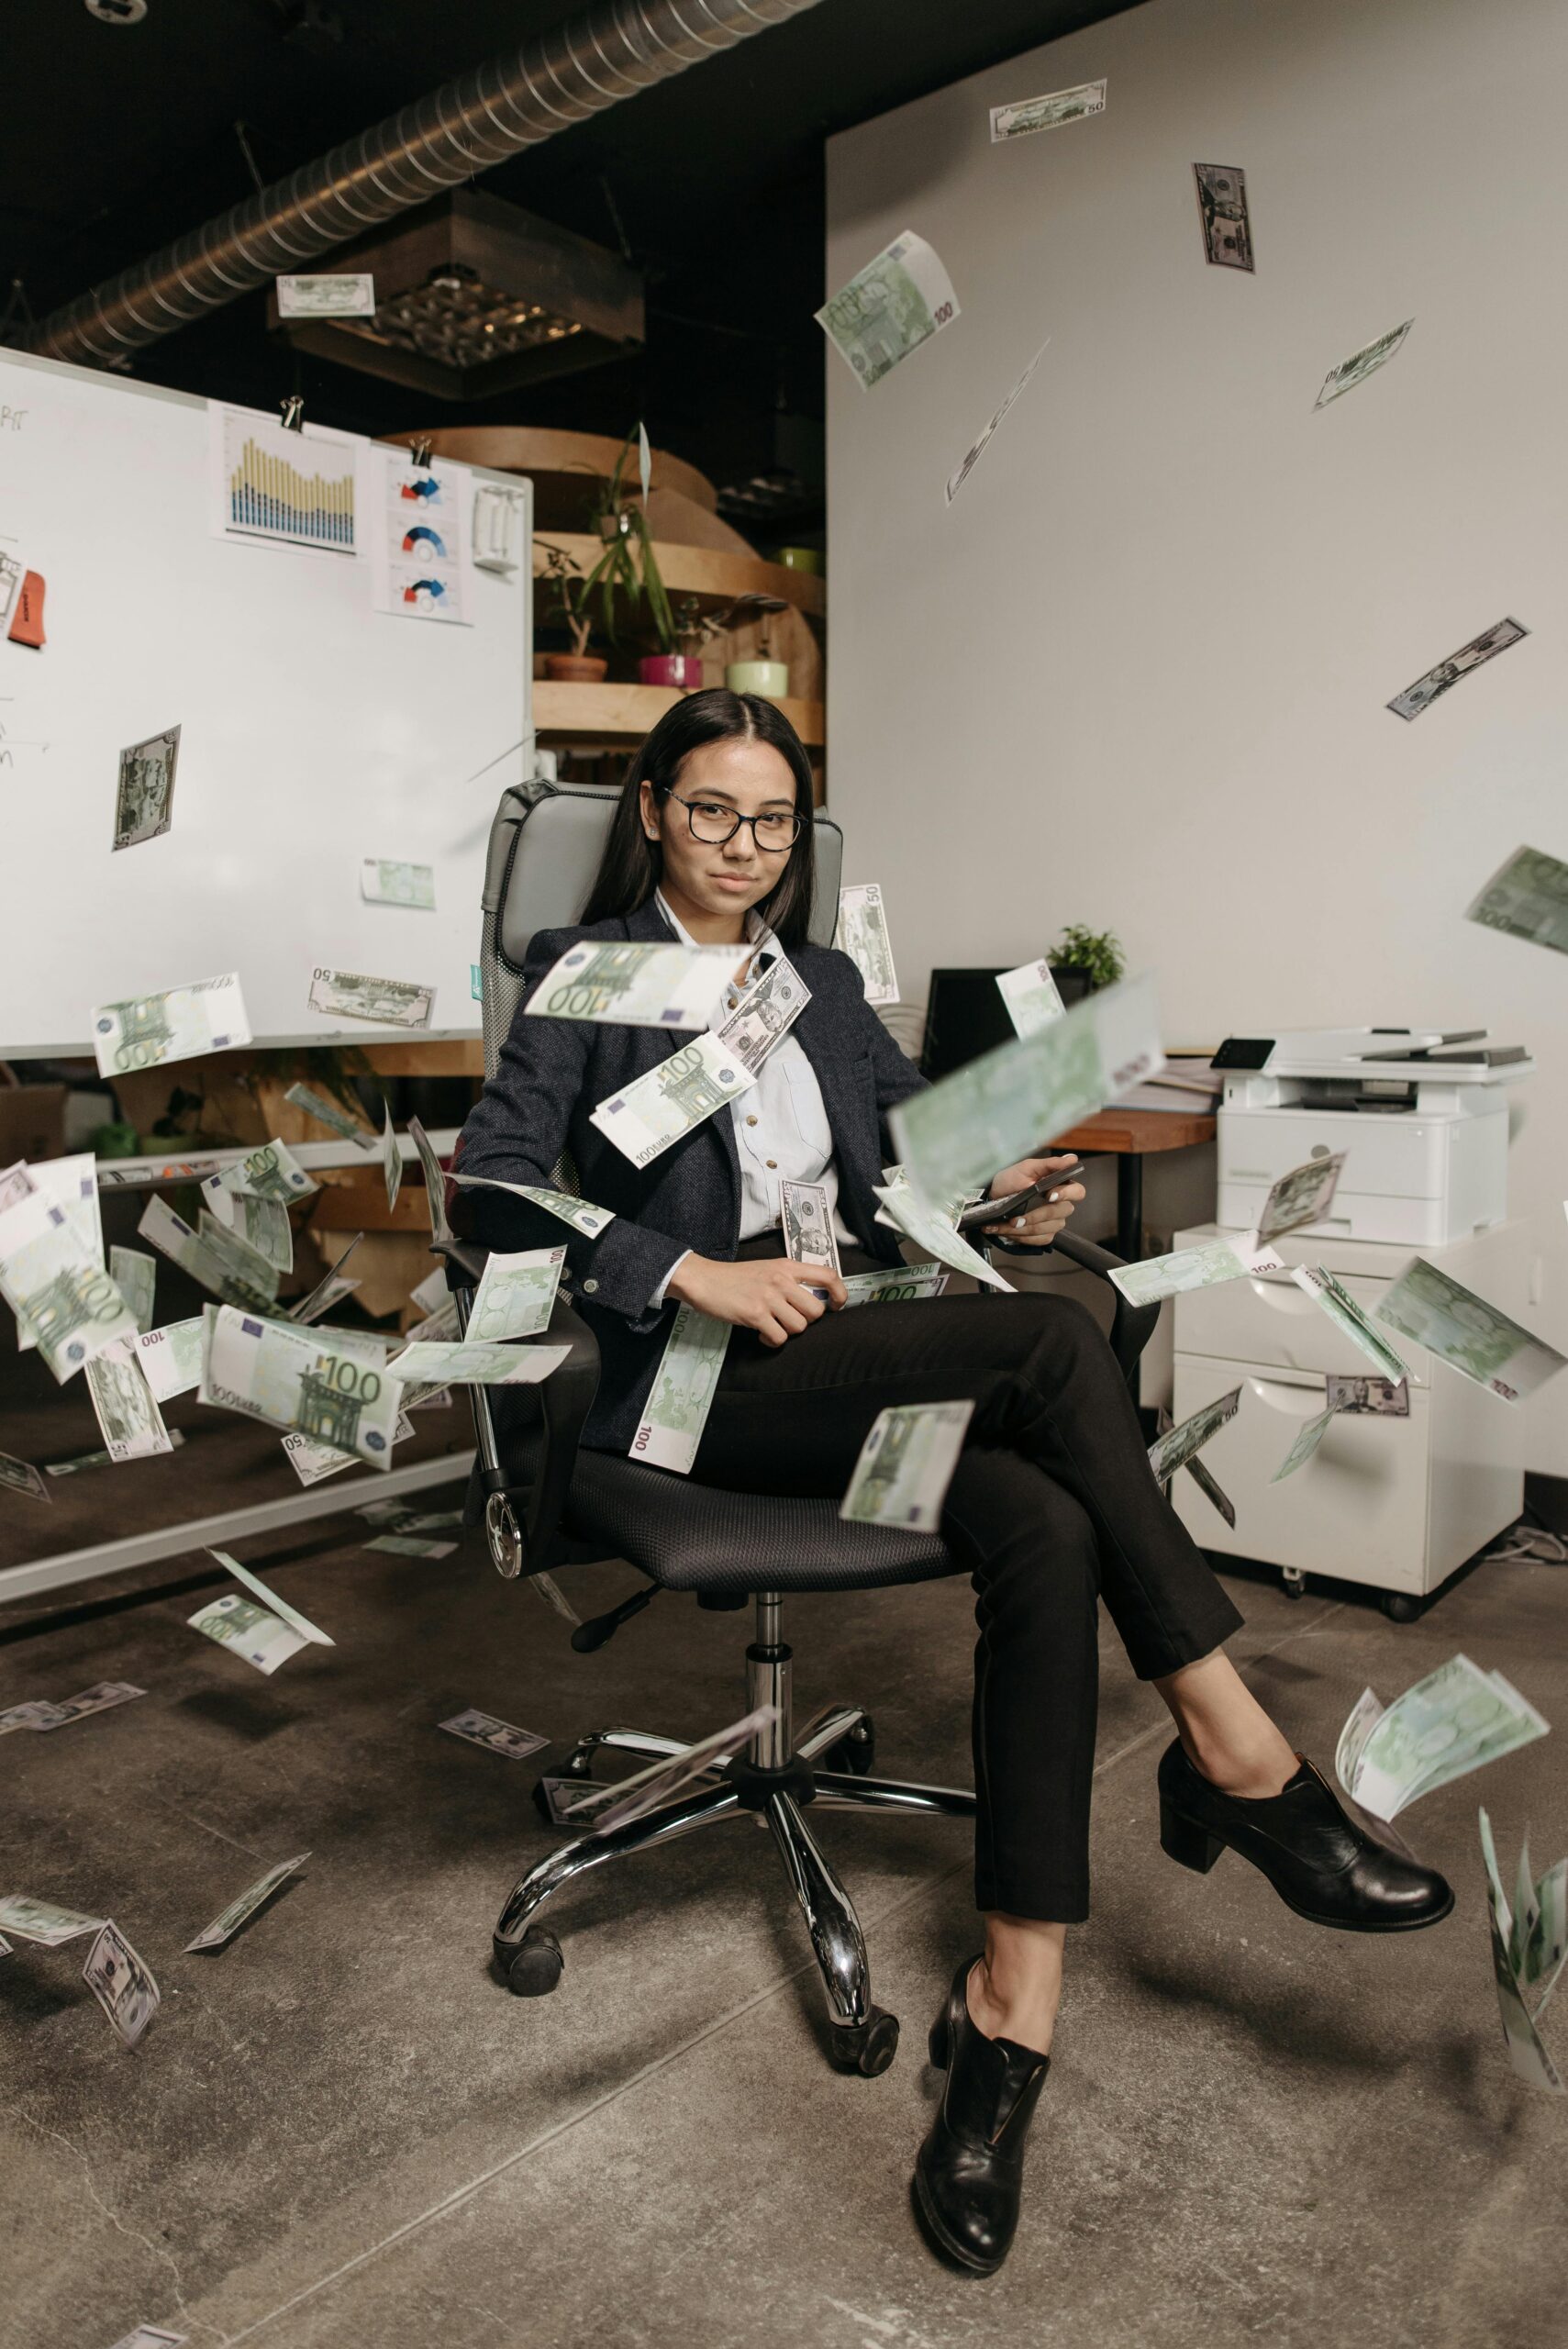 Visualisation for overconfidence: a woman sitting confidently in a chair, dollar bills raining from above